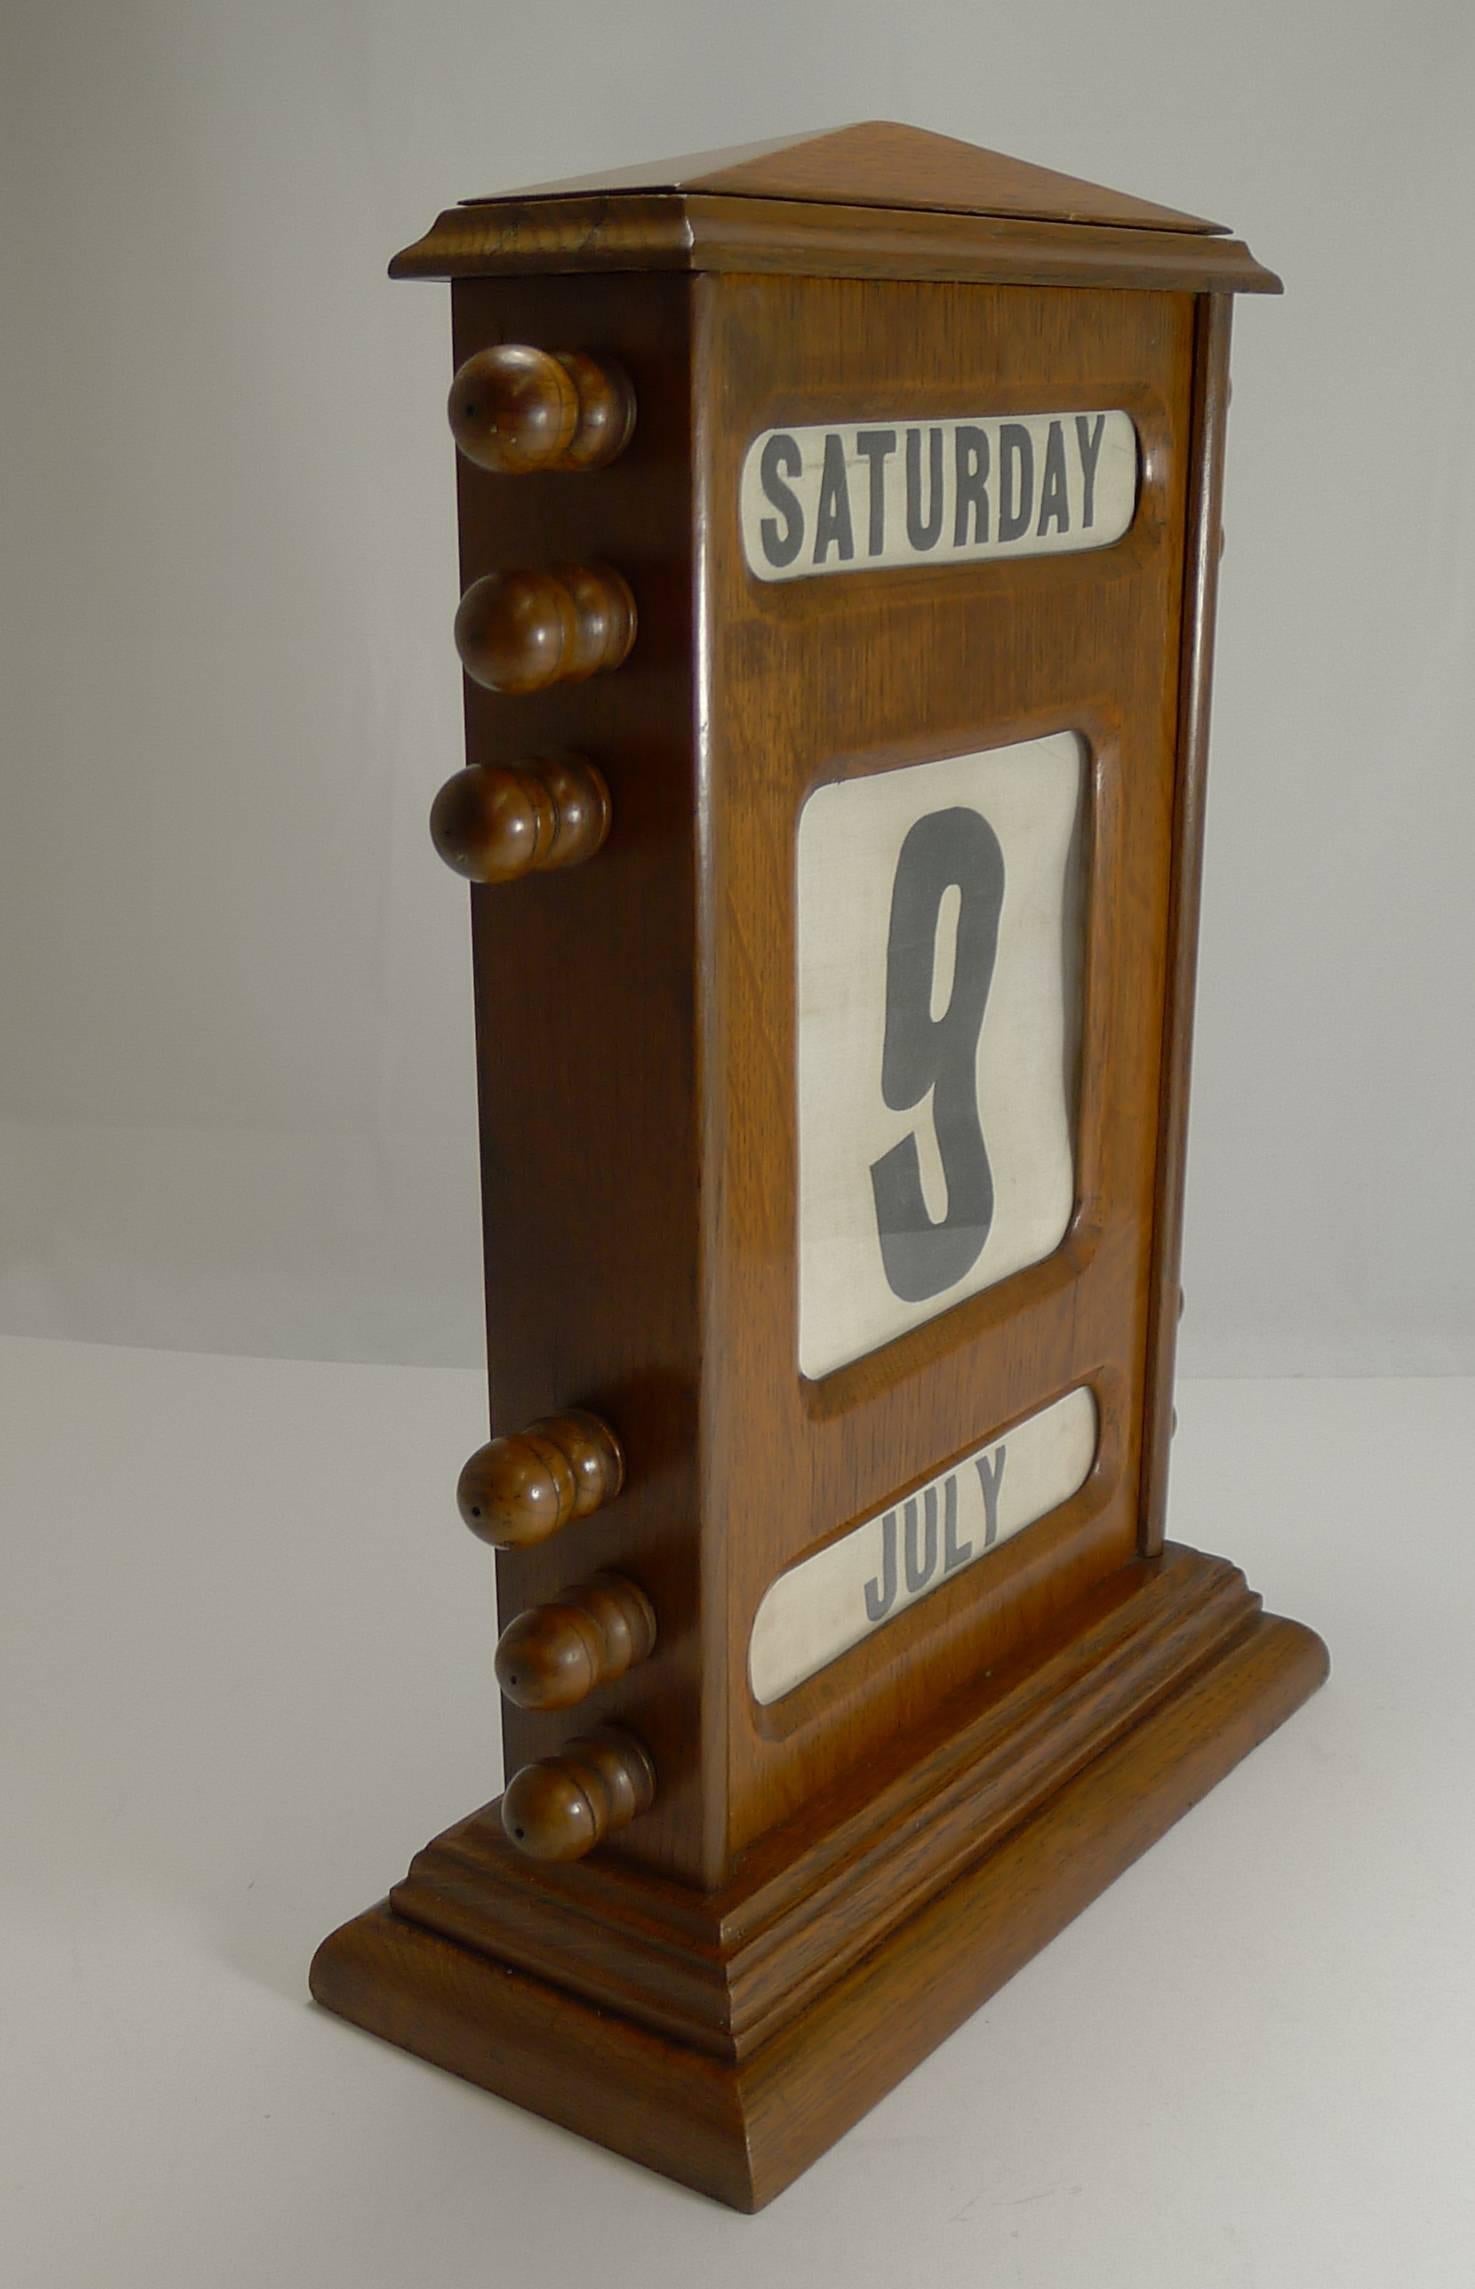 A rare and early example of a desk-top perpetual calendar, this one dating to the late 19th century, circa 1890.

Made from solid English Oak, this impressive oversized example stands a very grand 15 1/2